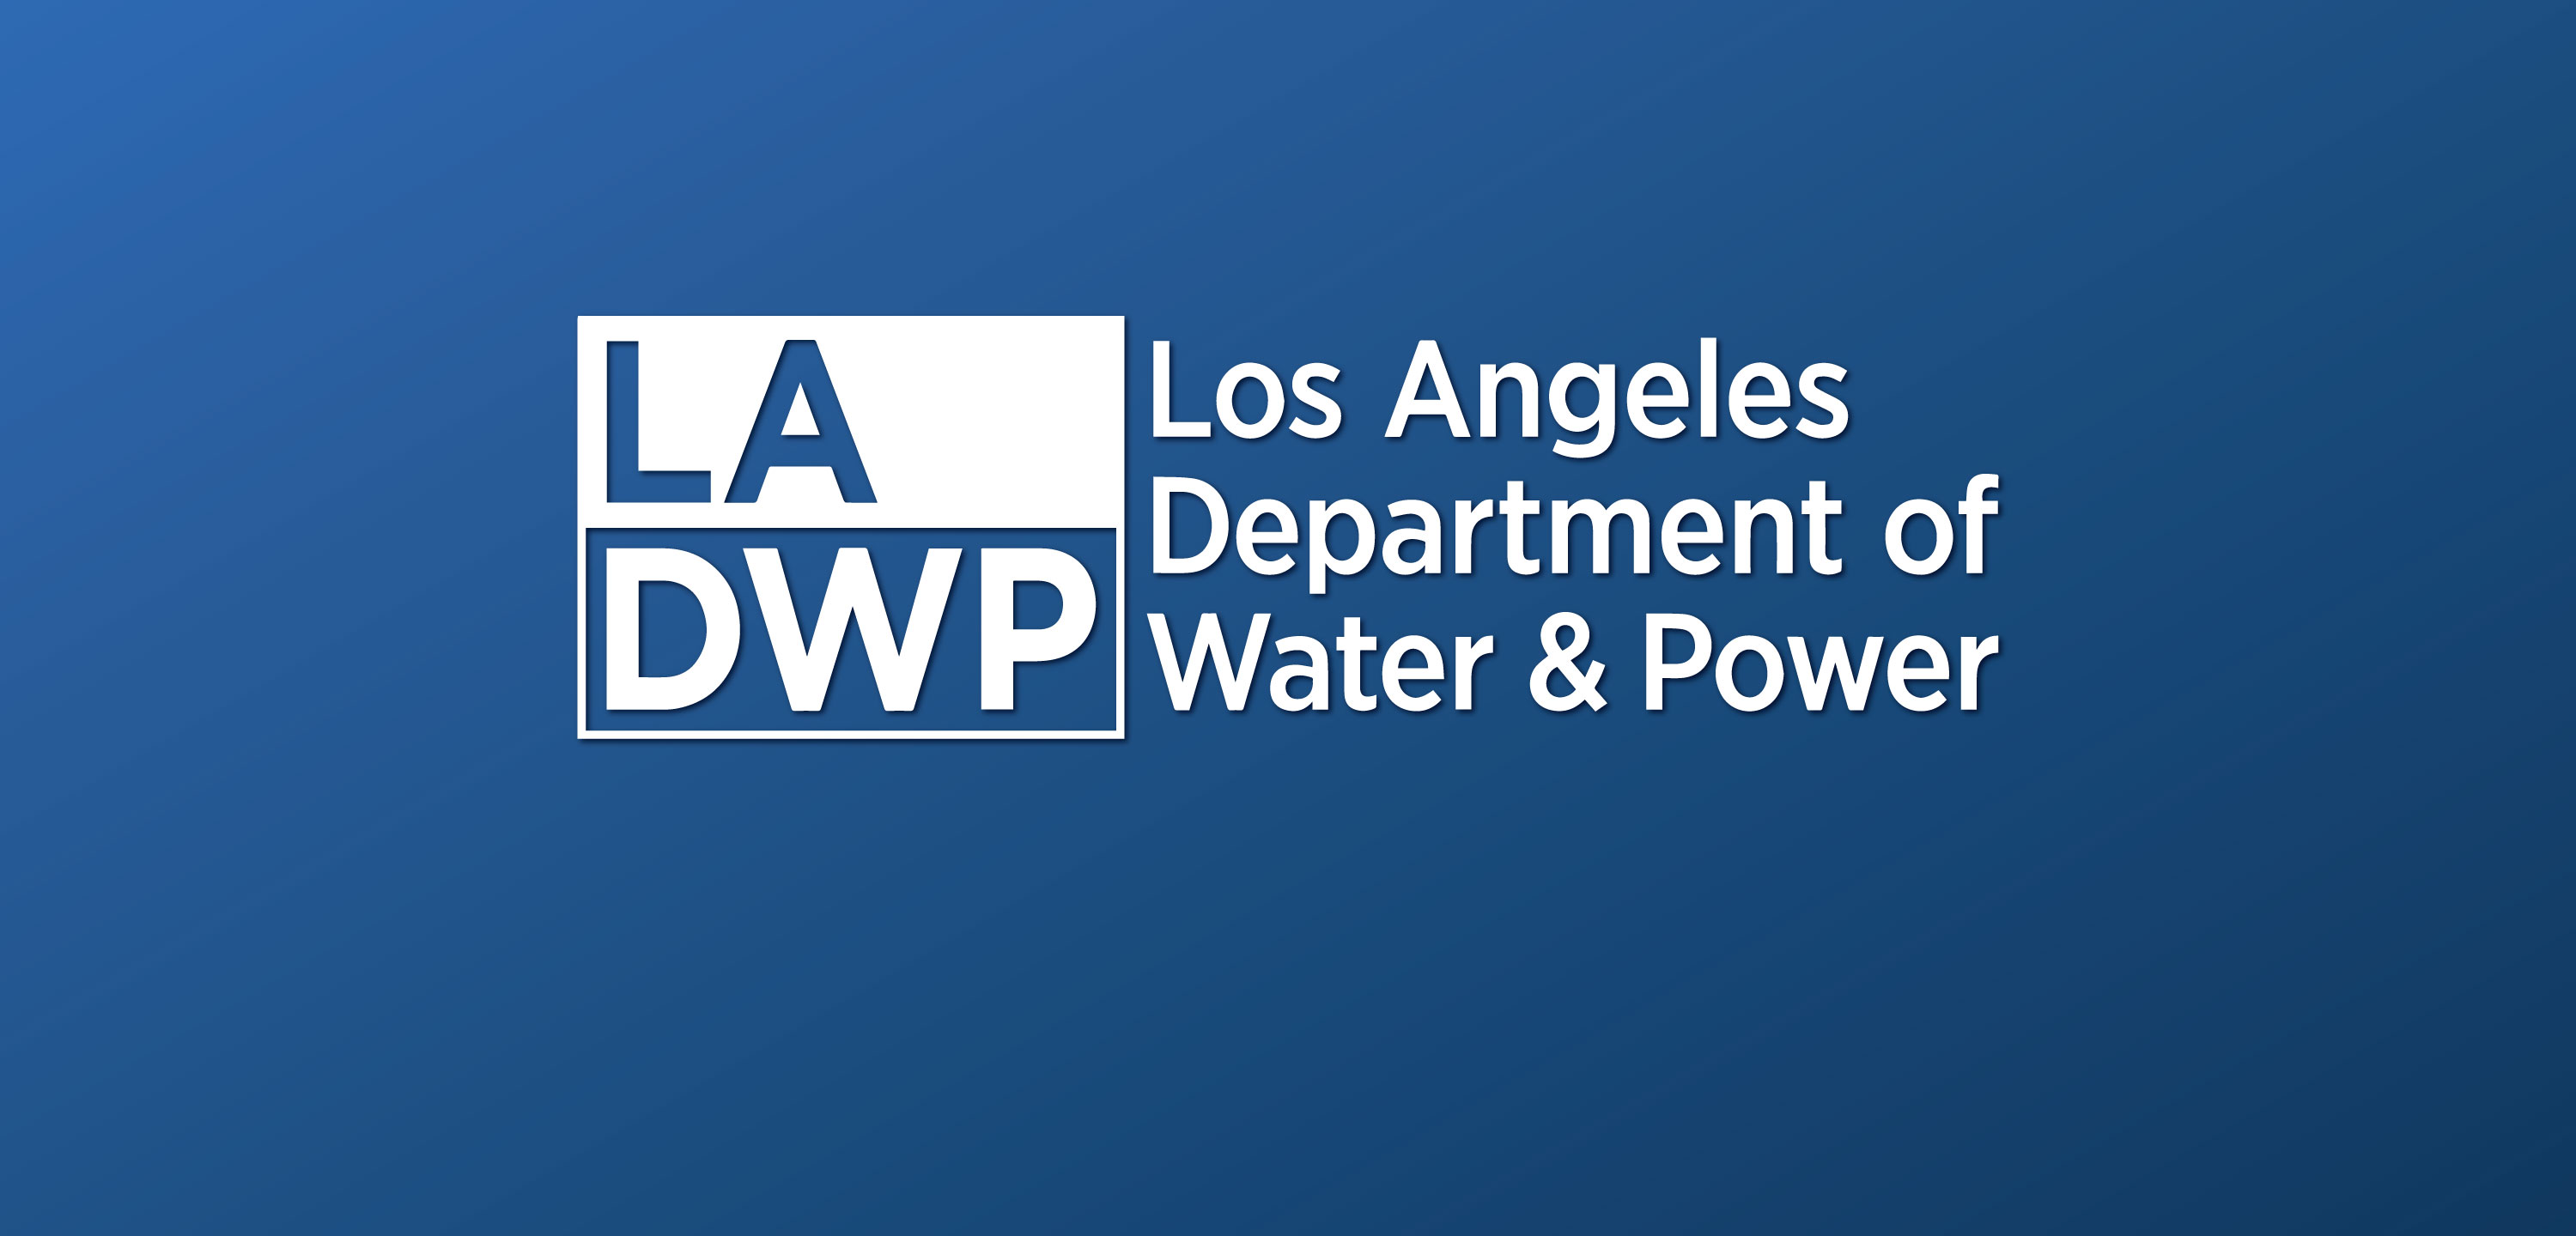 LADWP solar programs, incentives, and net metering